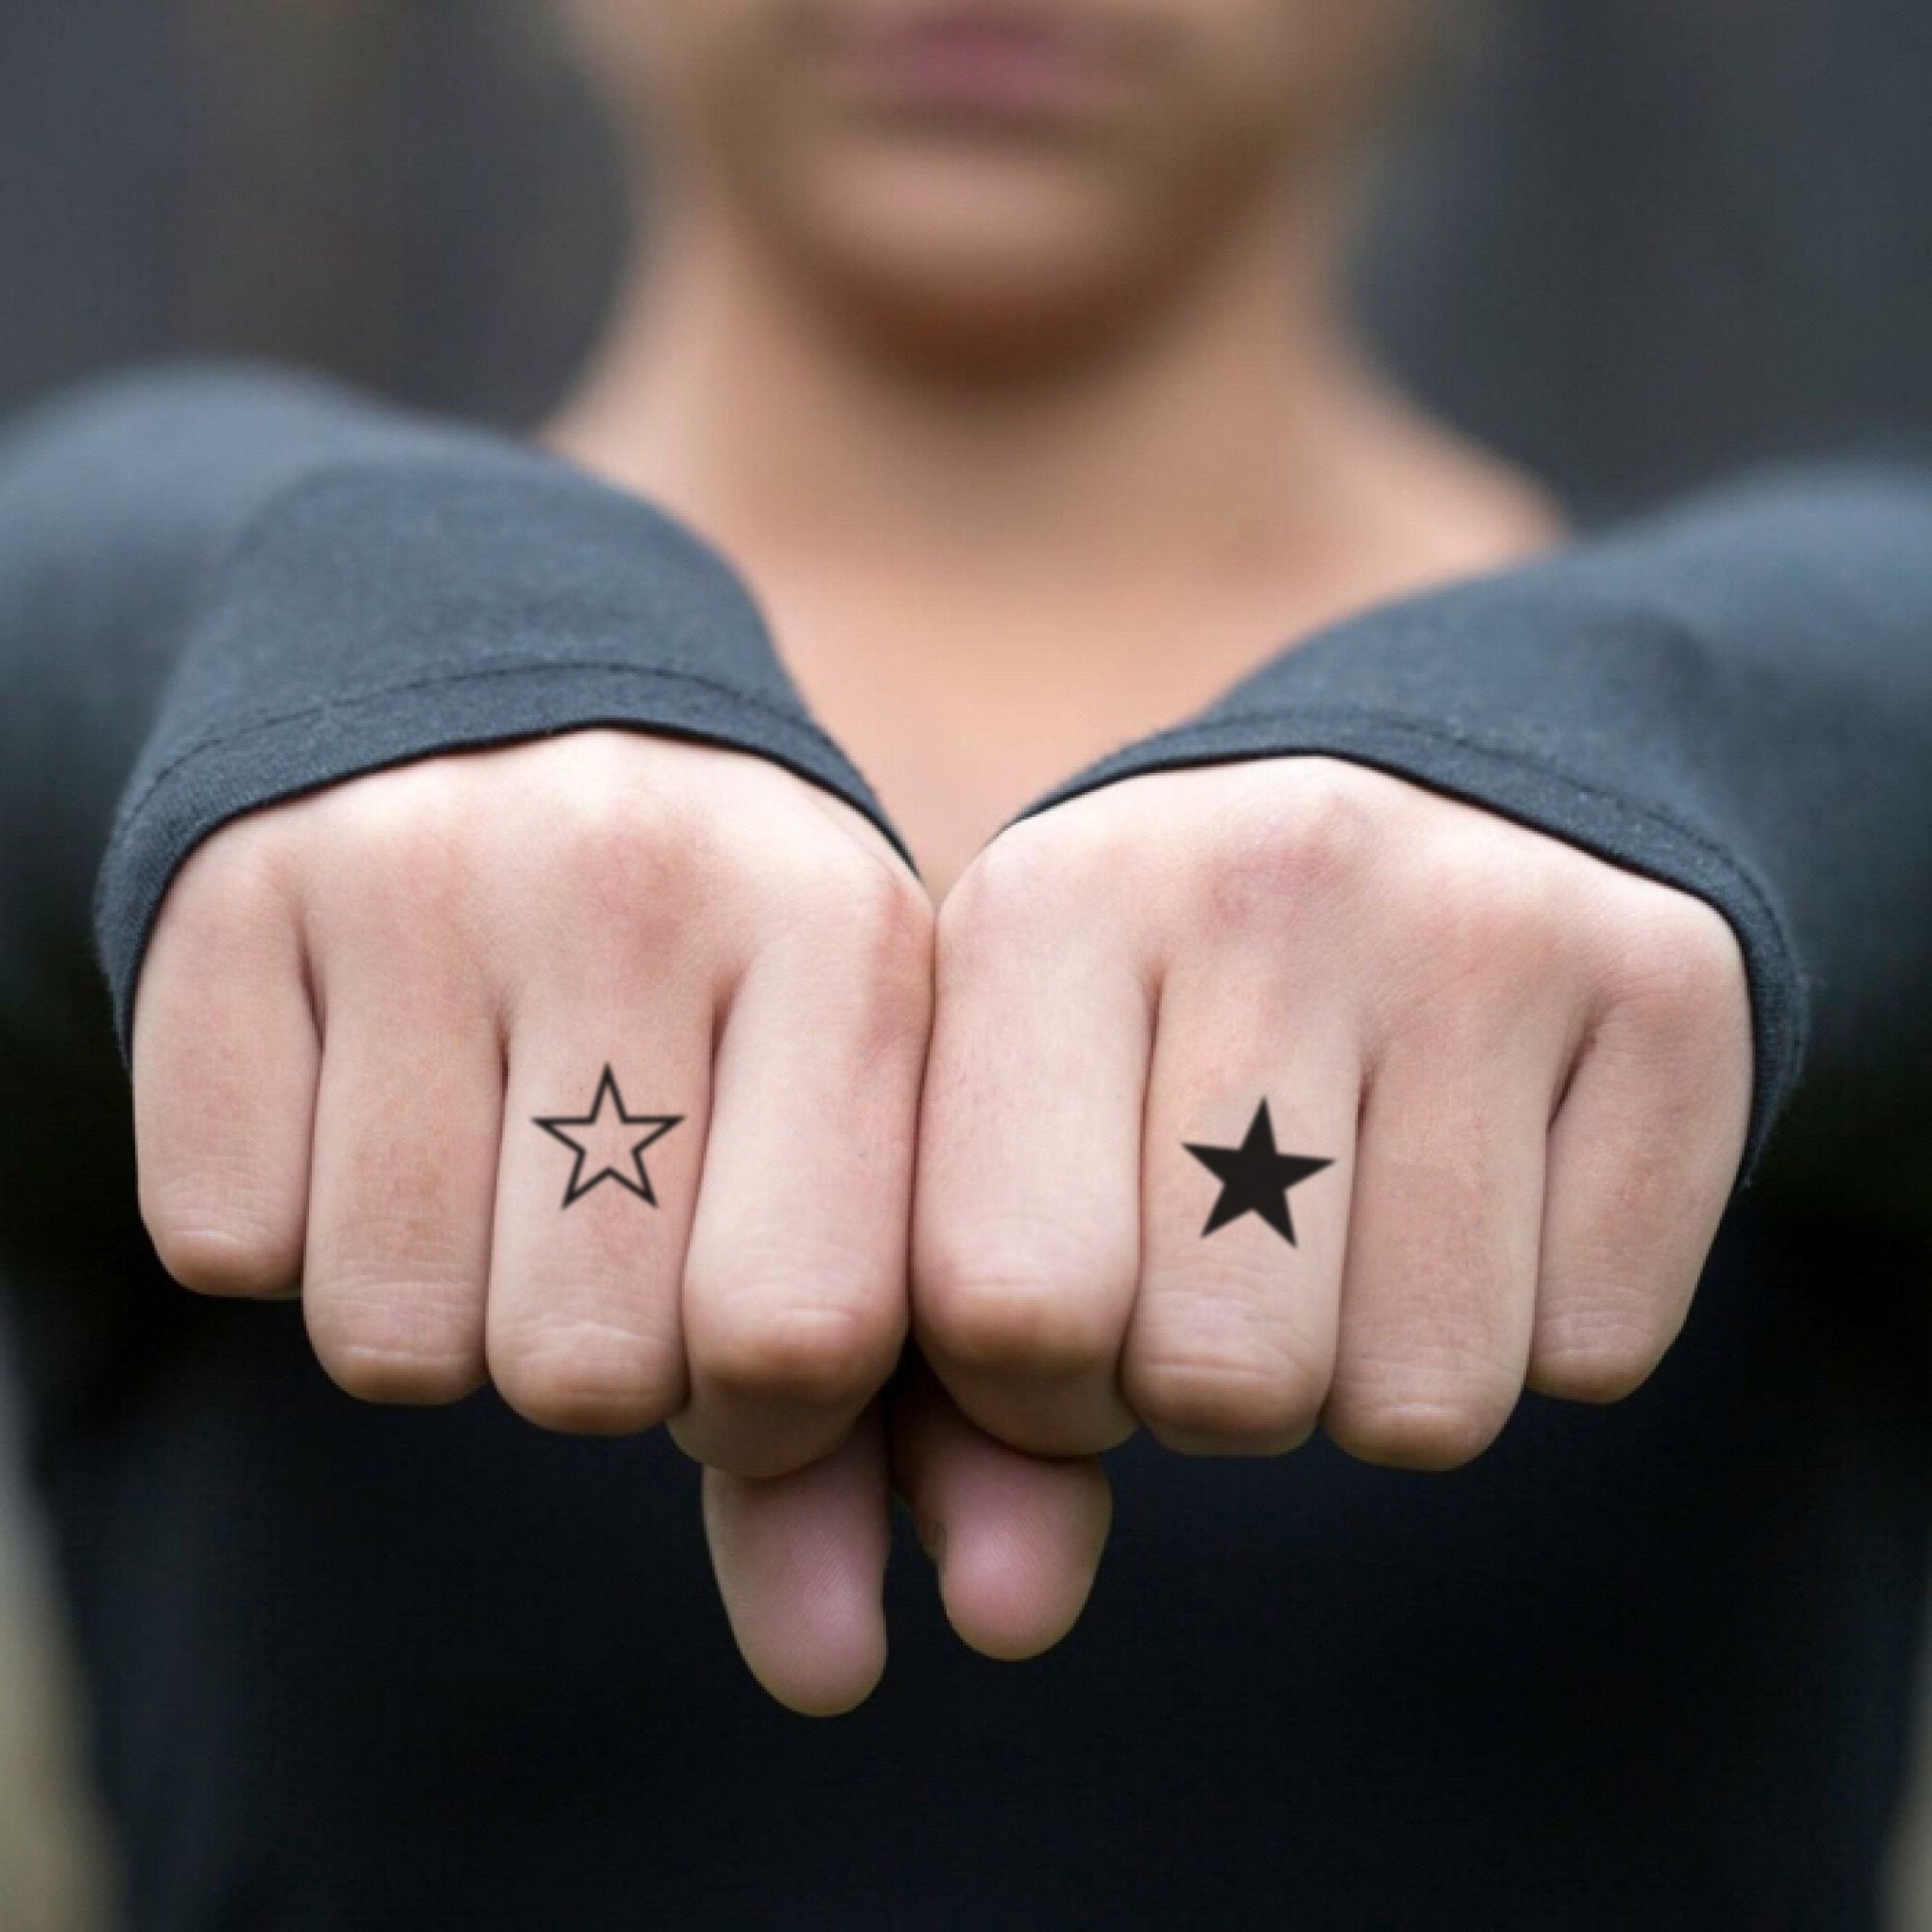 A woman with a star tattoo on her left hand photo  Free Finger Image on  Unsplash